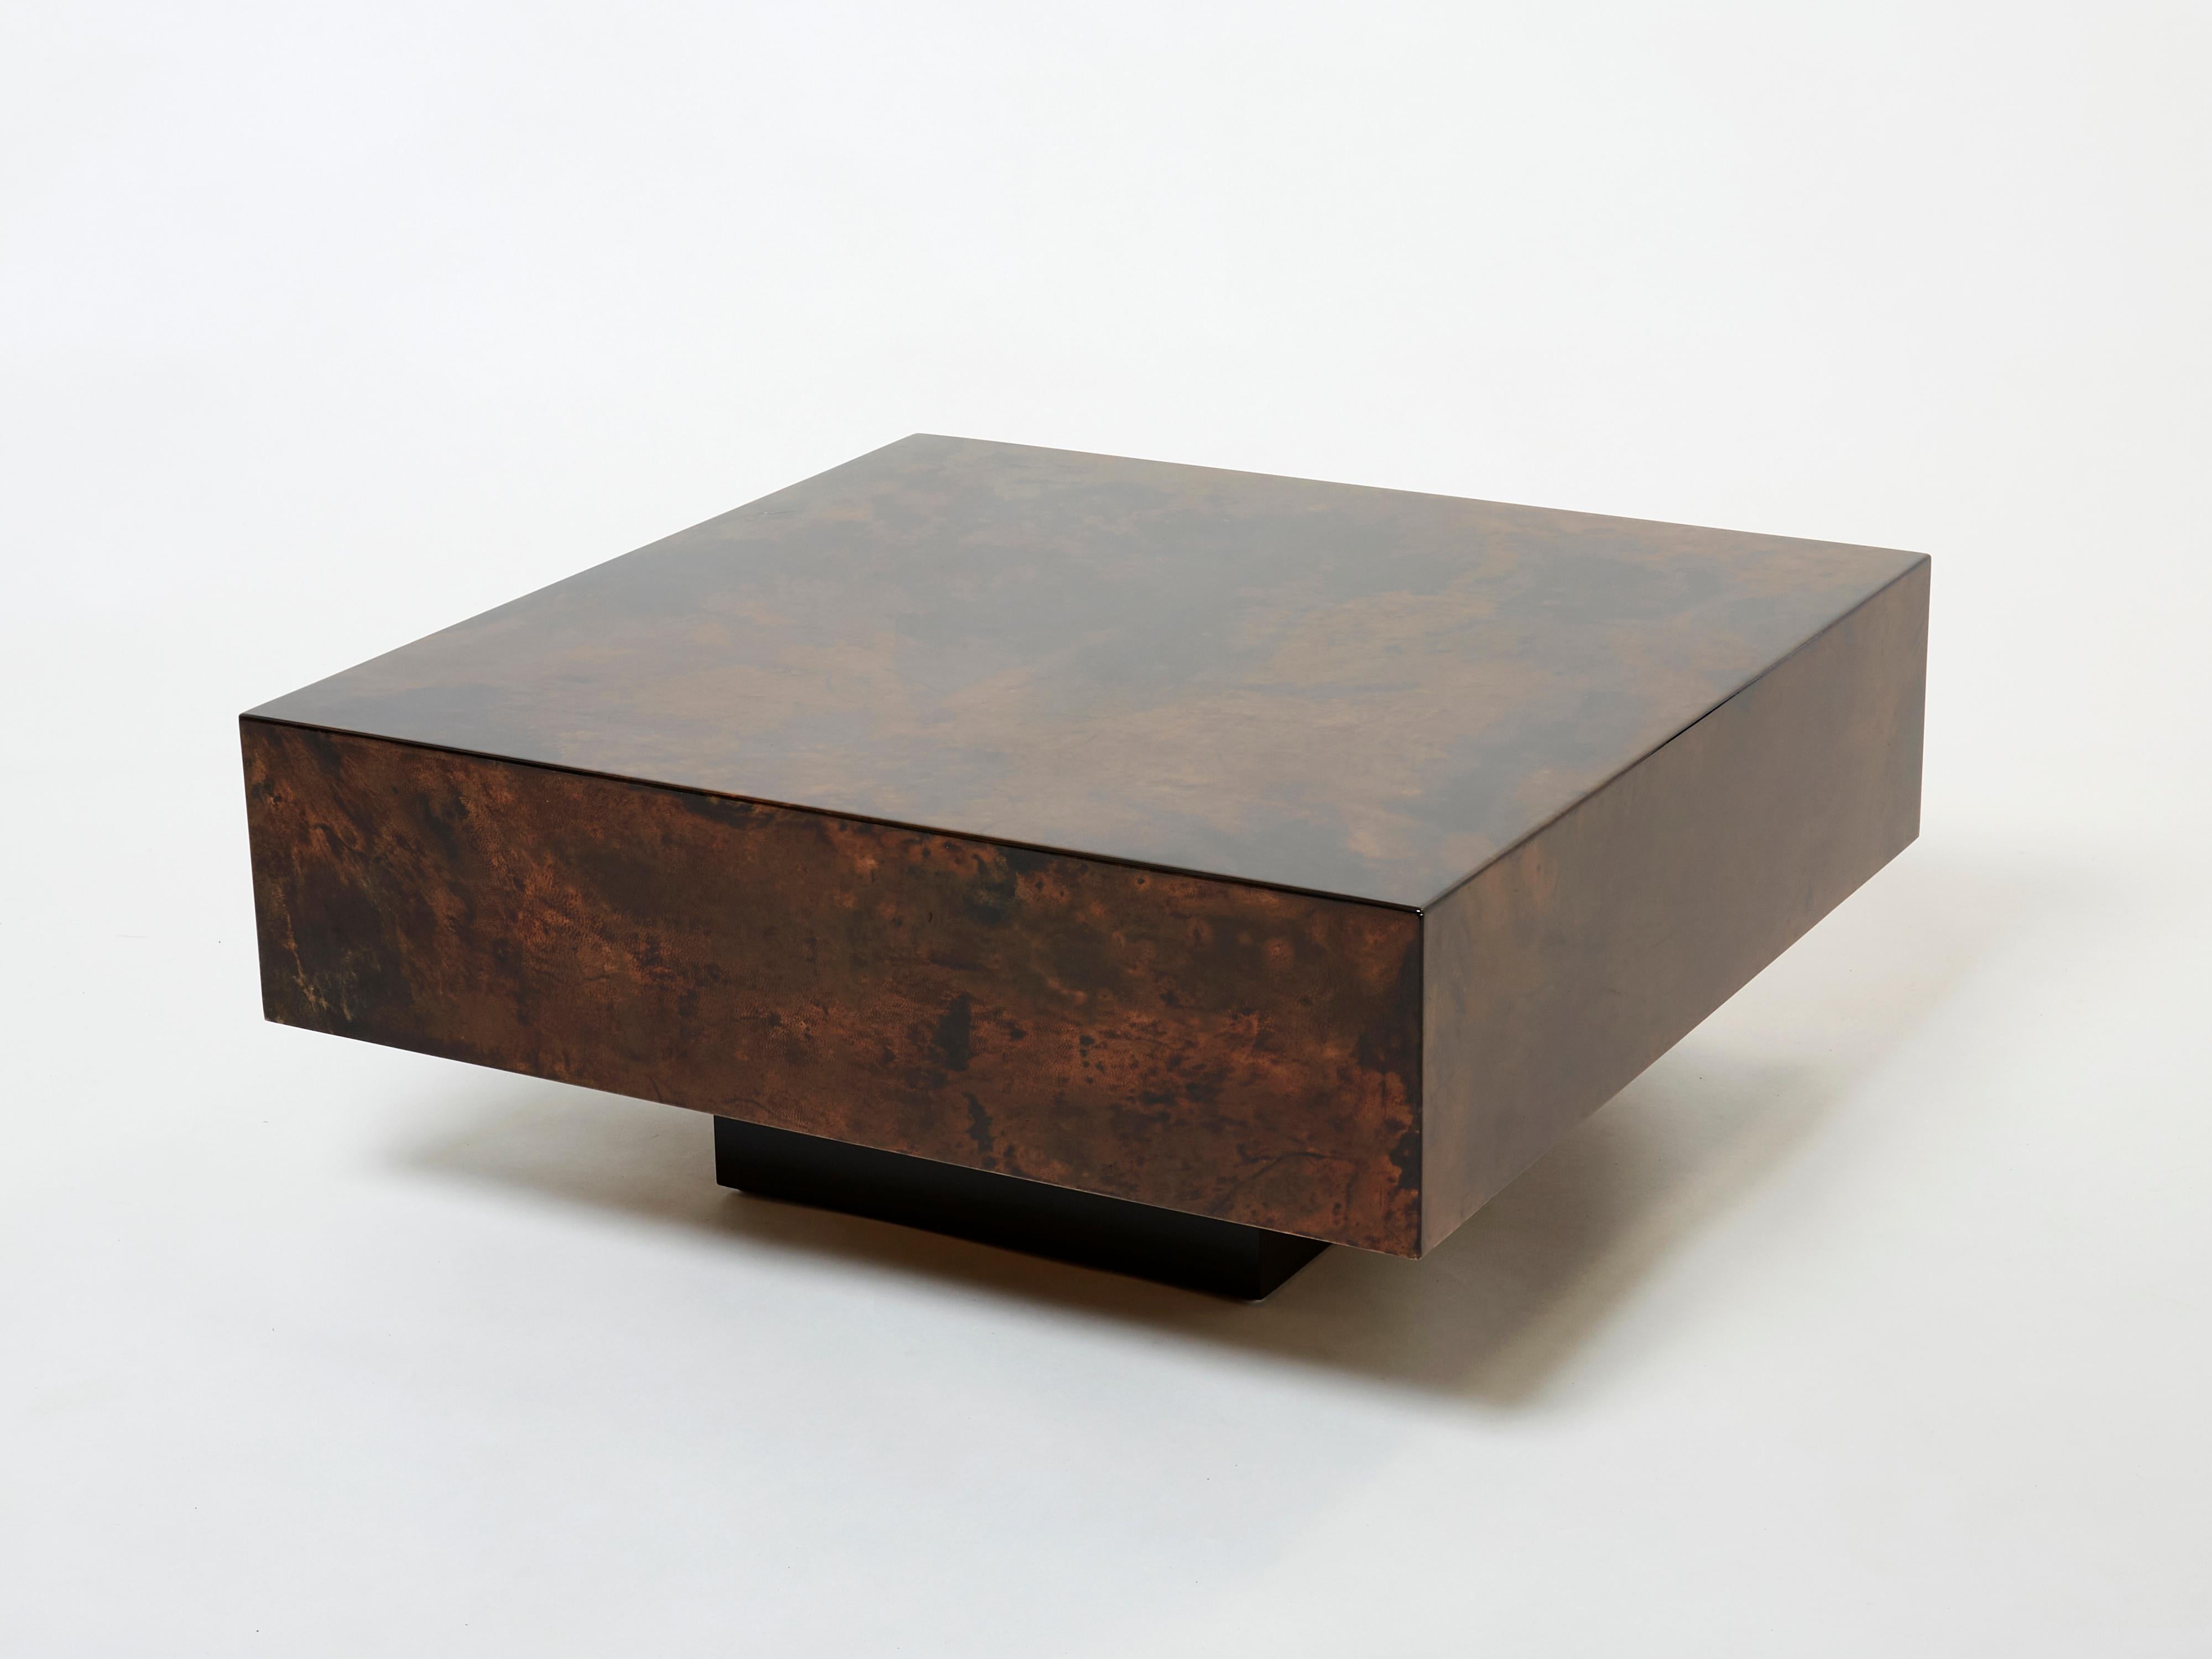 The varnished goatskin parchment, in rich shades of brown, makes this square coffee table typical of designer Aldo Tura. This small coffee table or end table would make a perfect warm and chic piece for any living room. It’s been beautifully